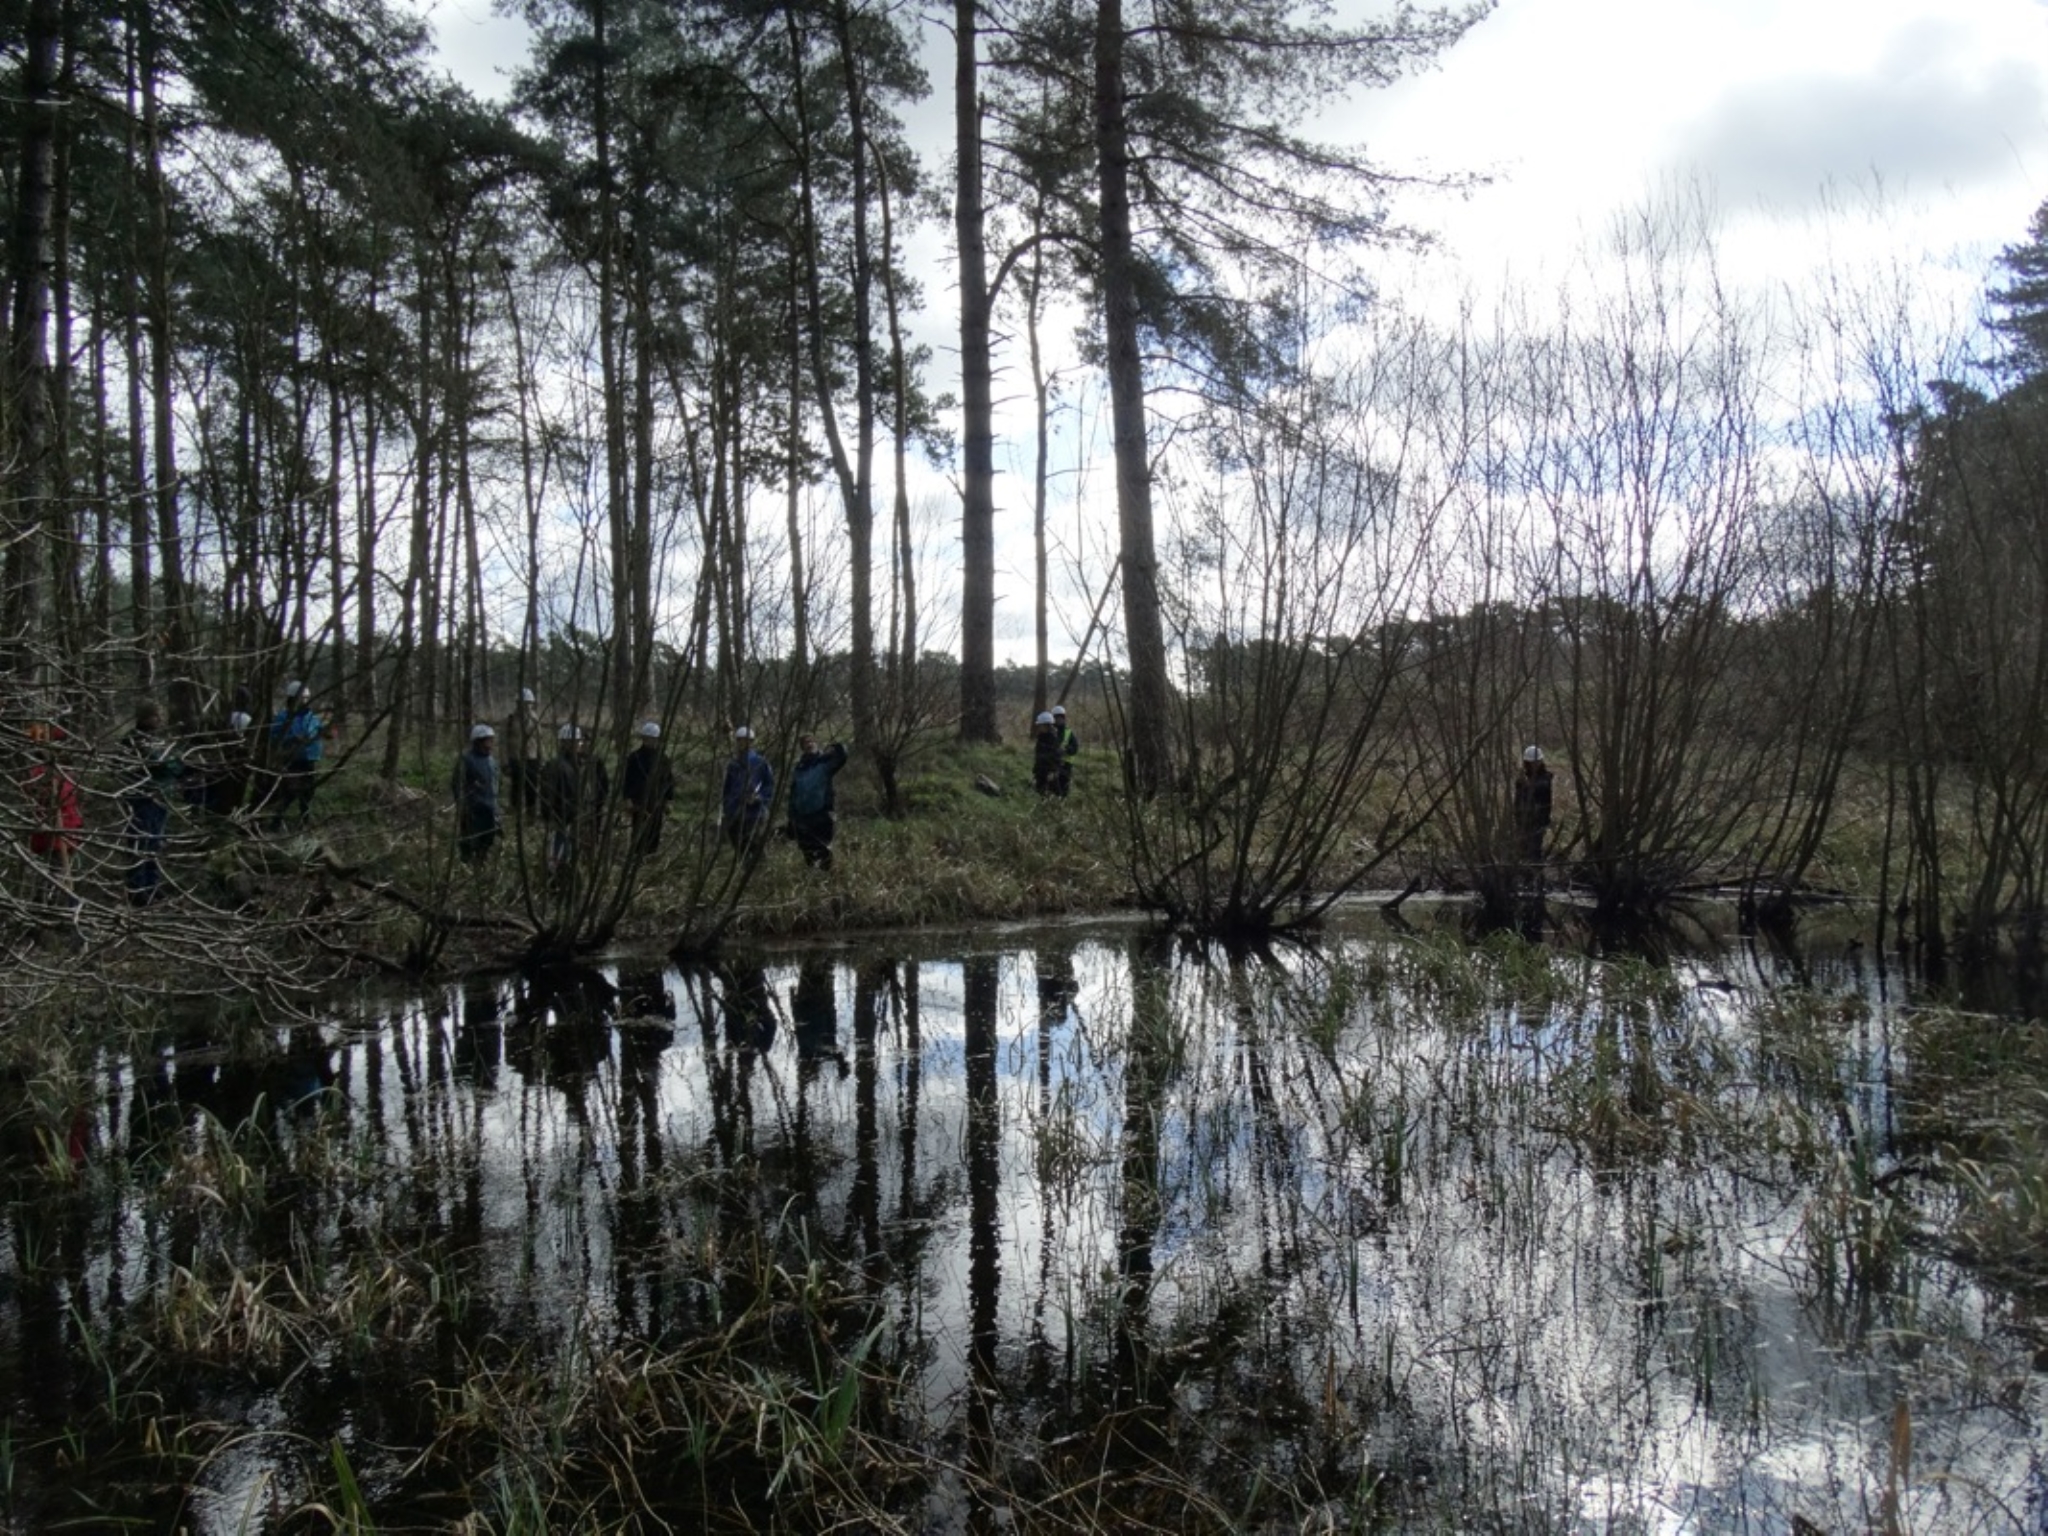 A photo from the FoTF Conservation Event - March 2019 - Clearance work around, and in, the ponds at Harling Woods, Harling : The volunteers gather at the edge of one of the ponds